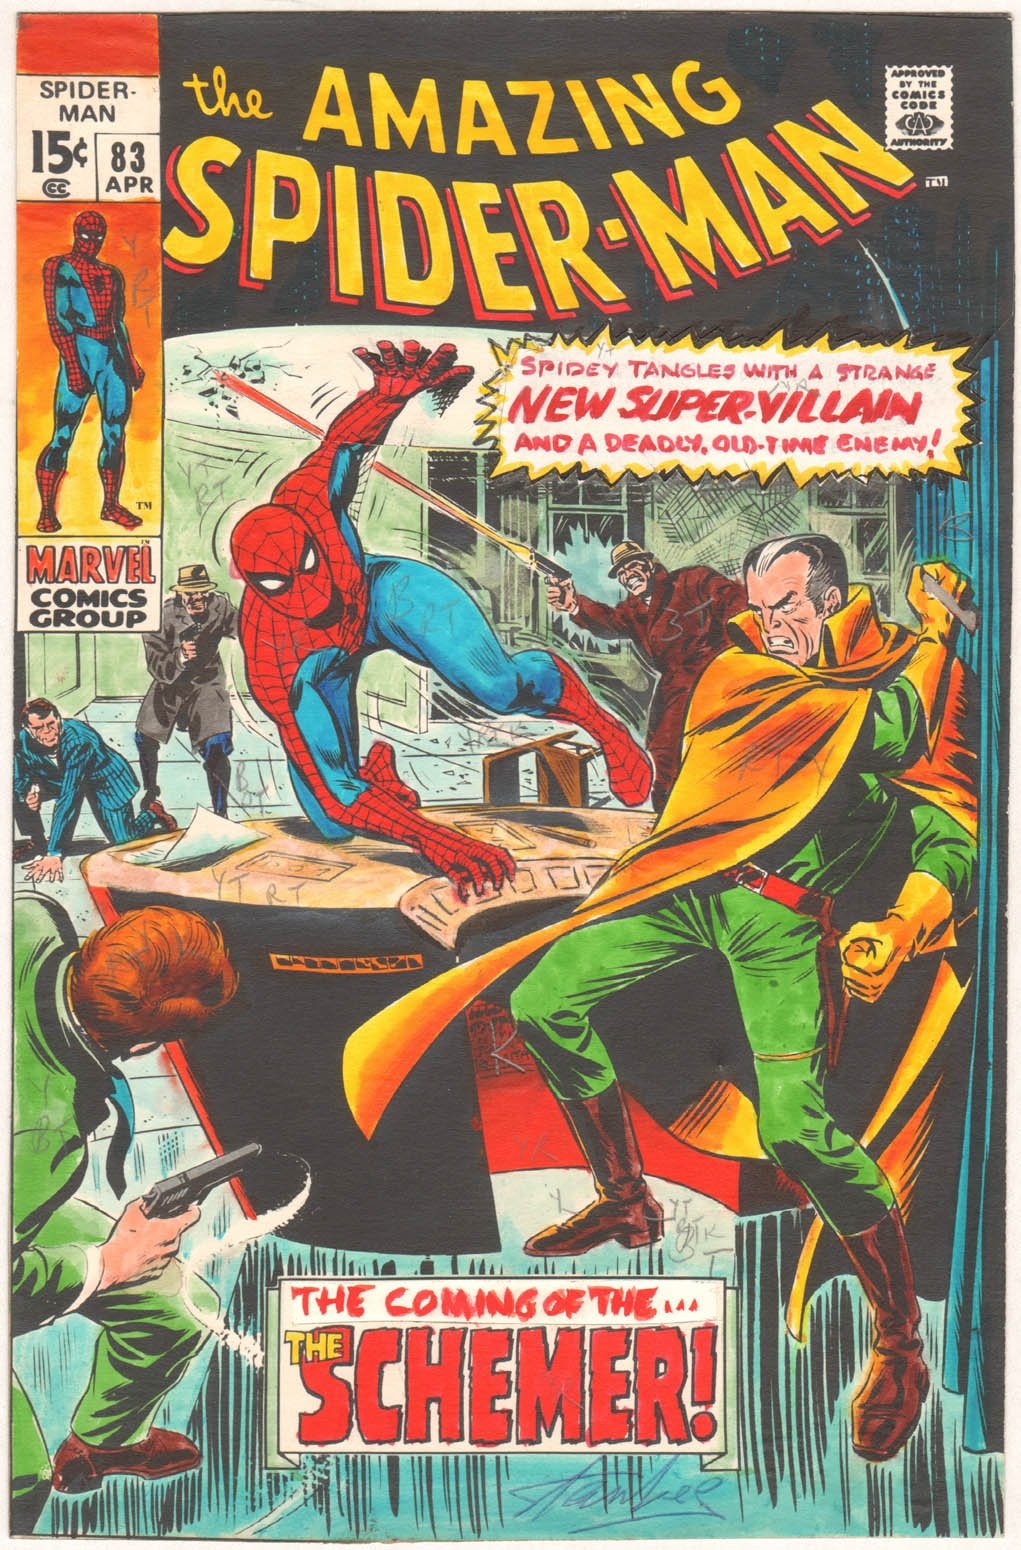 AMAZING SPIDER-MAN #83 HAND-PAINTED COVER COLOR GUIDE ( 1970, MARIE SEVERIN  ) ONE-OF-A-KIND PRODUCTION MATERIAL SIGNED BY STAN LEE, in Original Art  Auctions and Exchange: 's CLOSED FEATURED AUCTION HIGHLIGHTS -  08/2018